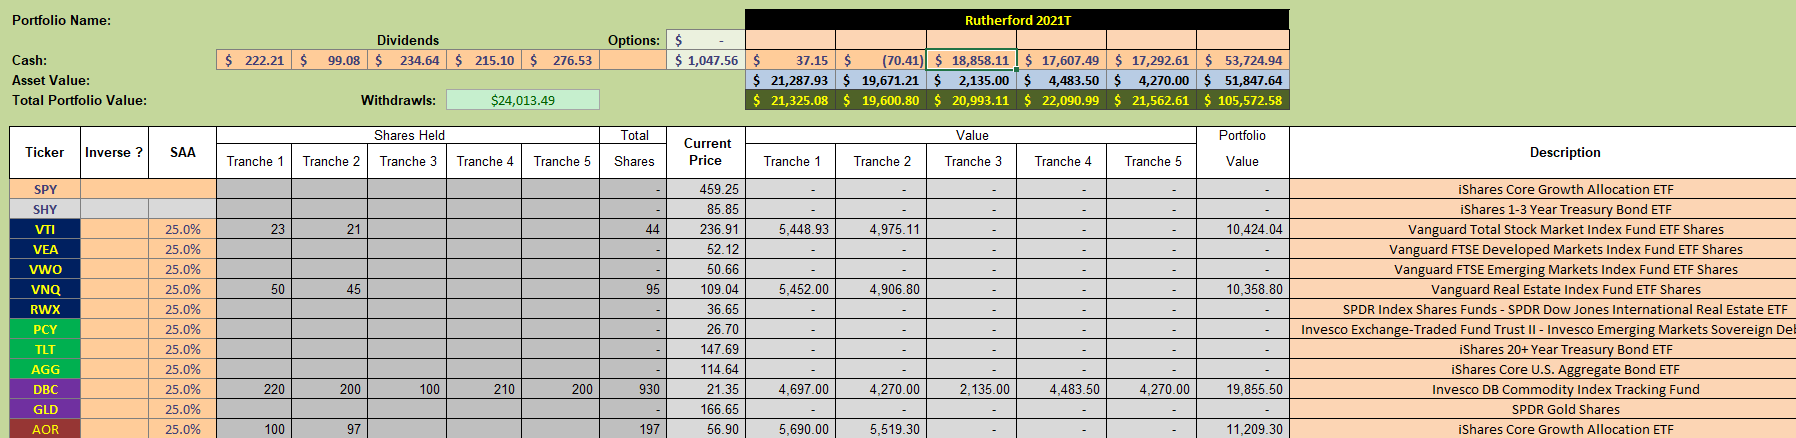 Rutherford Portfolio Review (Tranche 3) – 29 October 2021 4